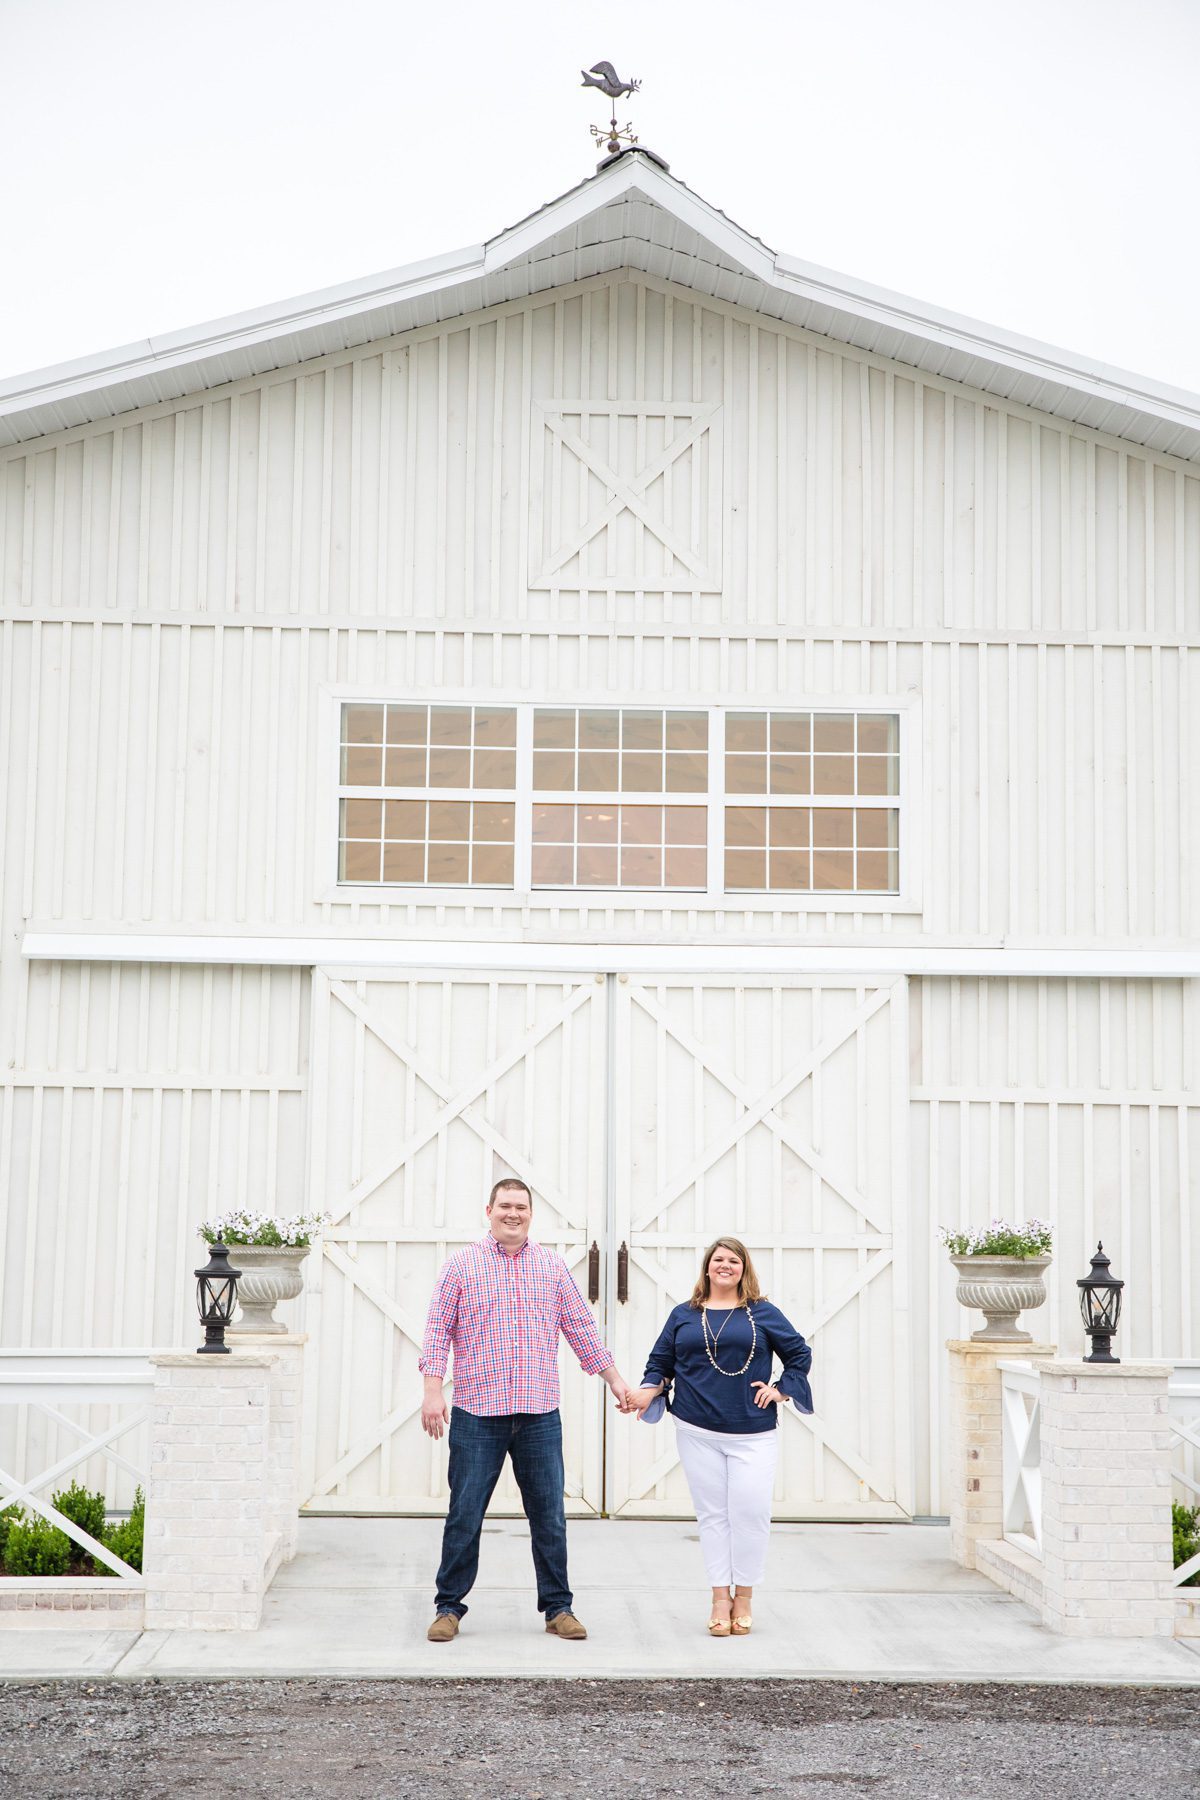 Rustic chic wedding engagement session at white dove barn in beechgrove tn